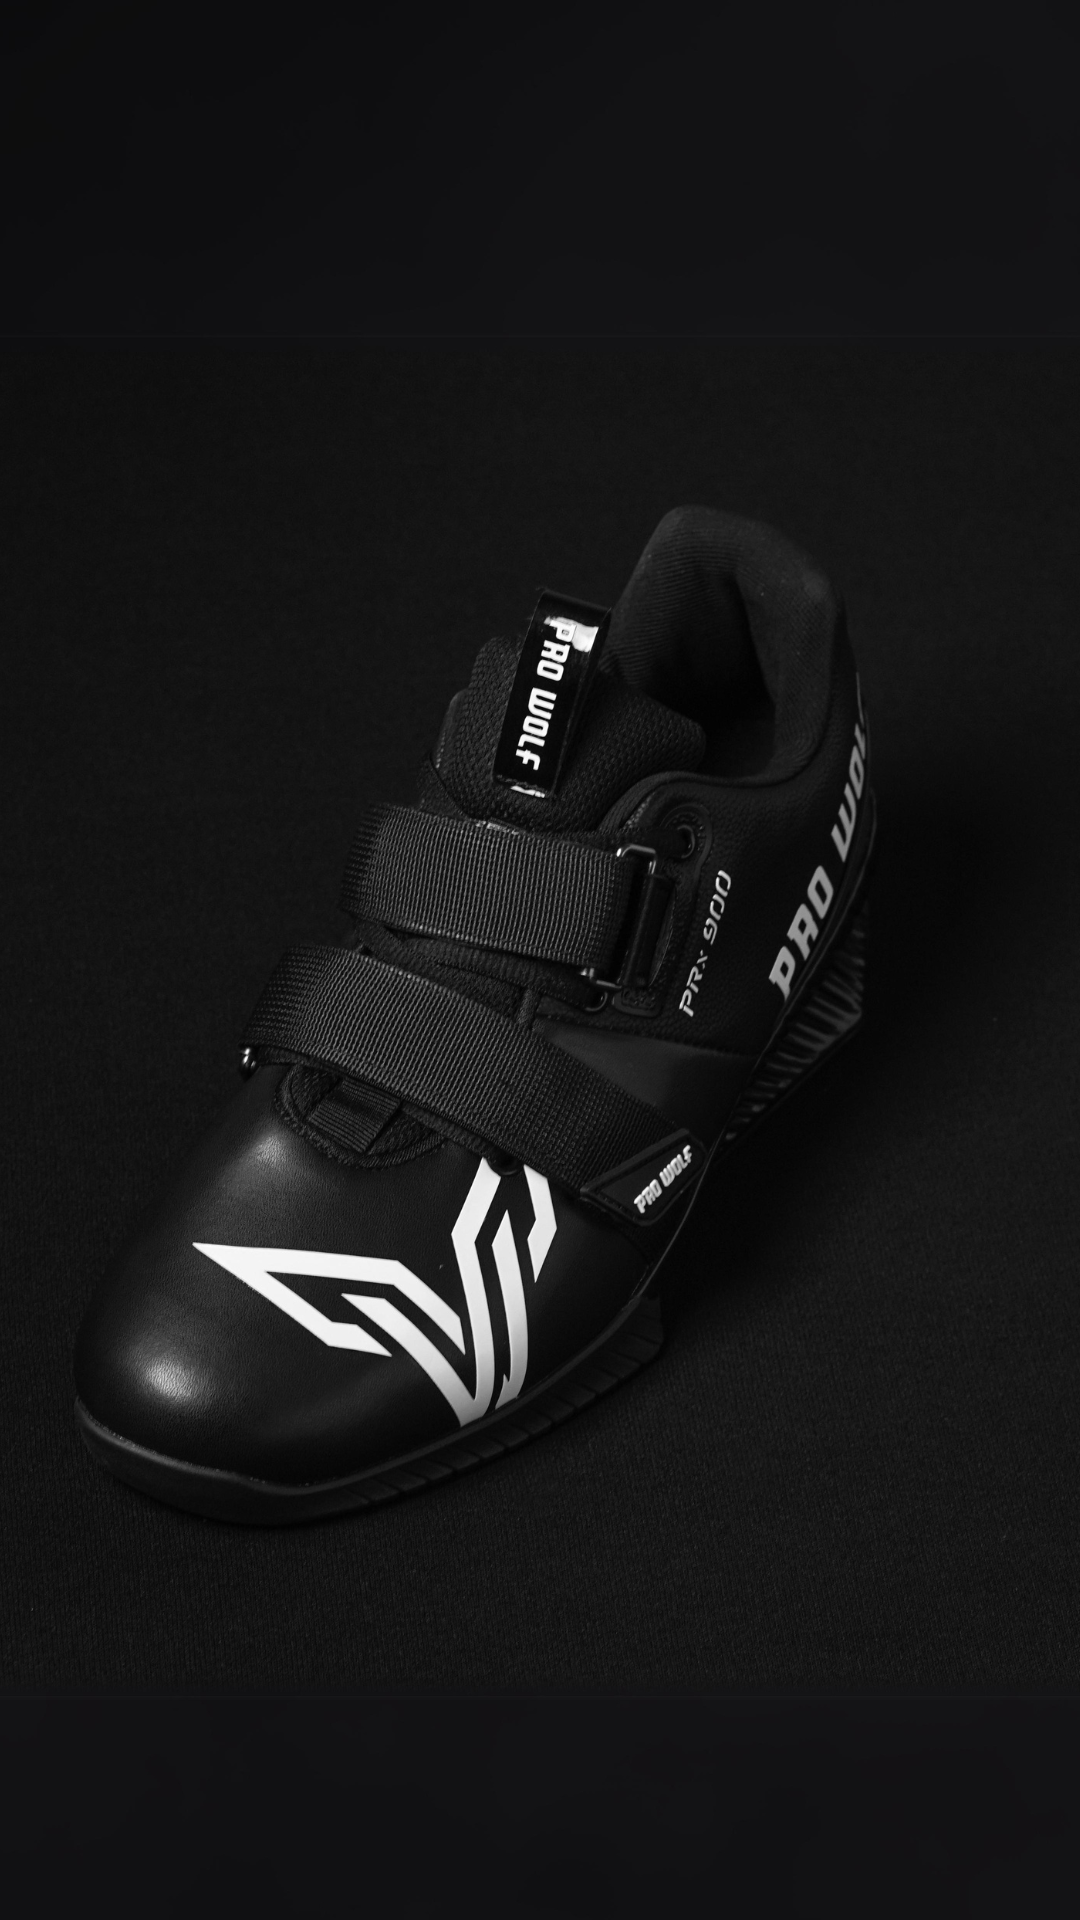 Black weight lifting shoes